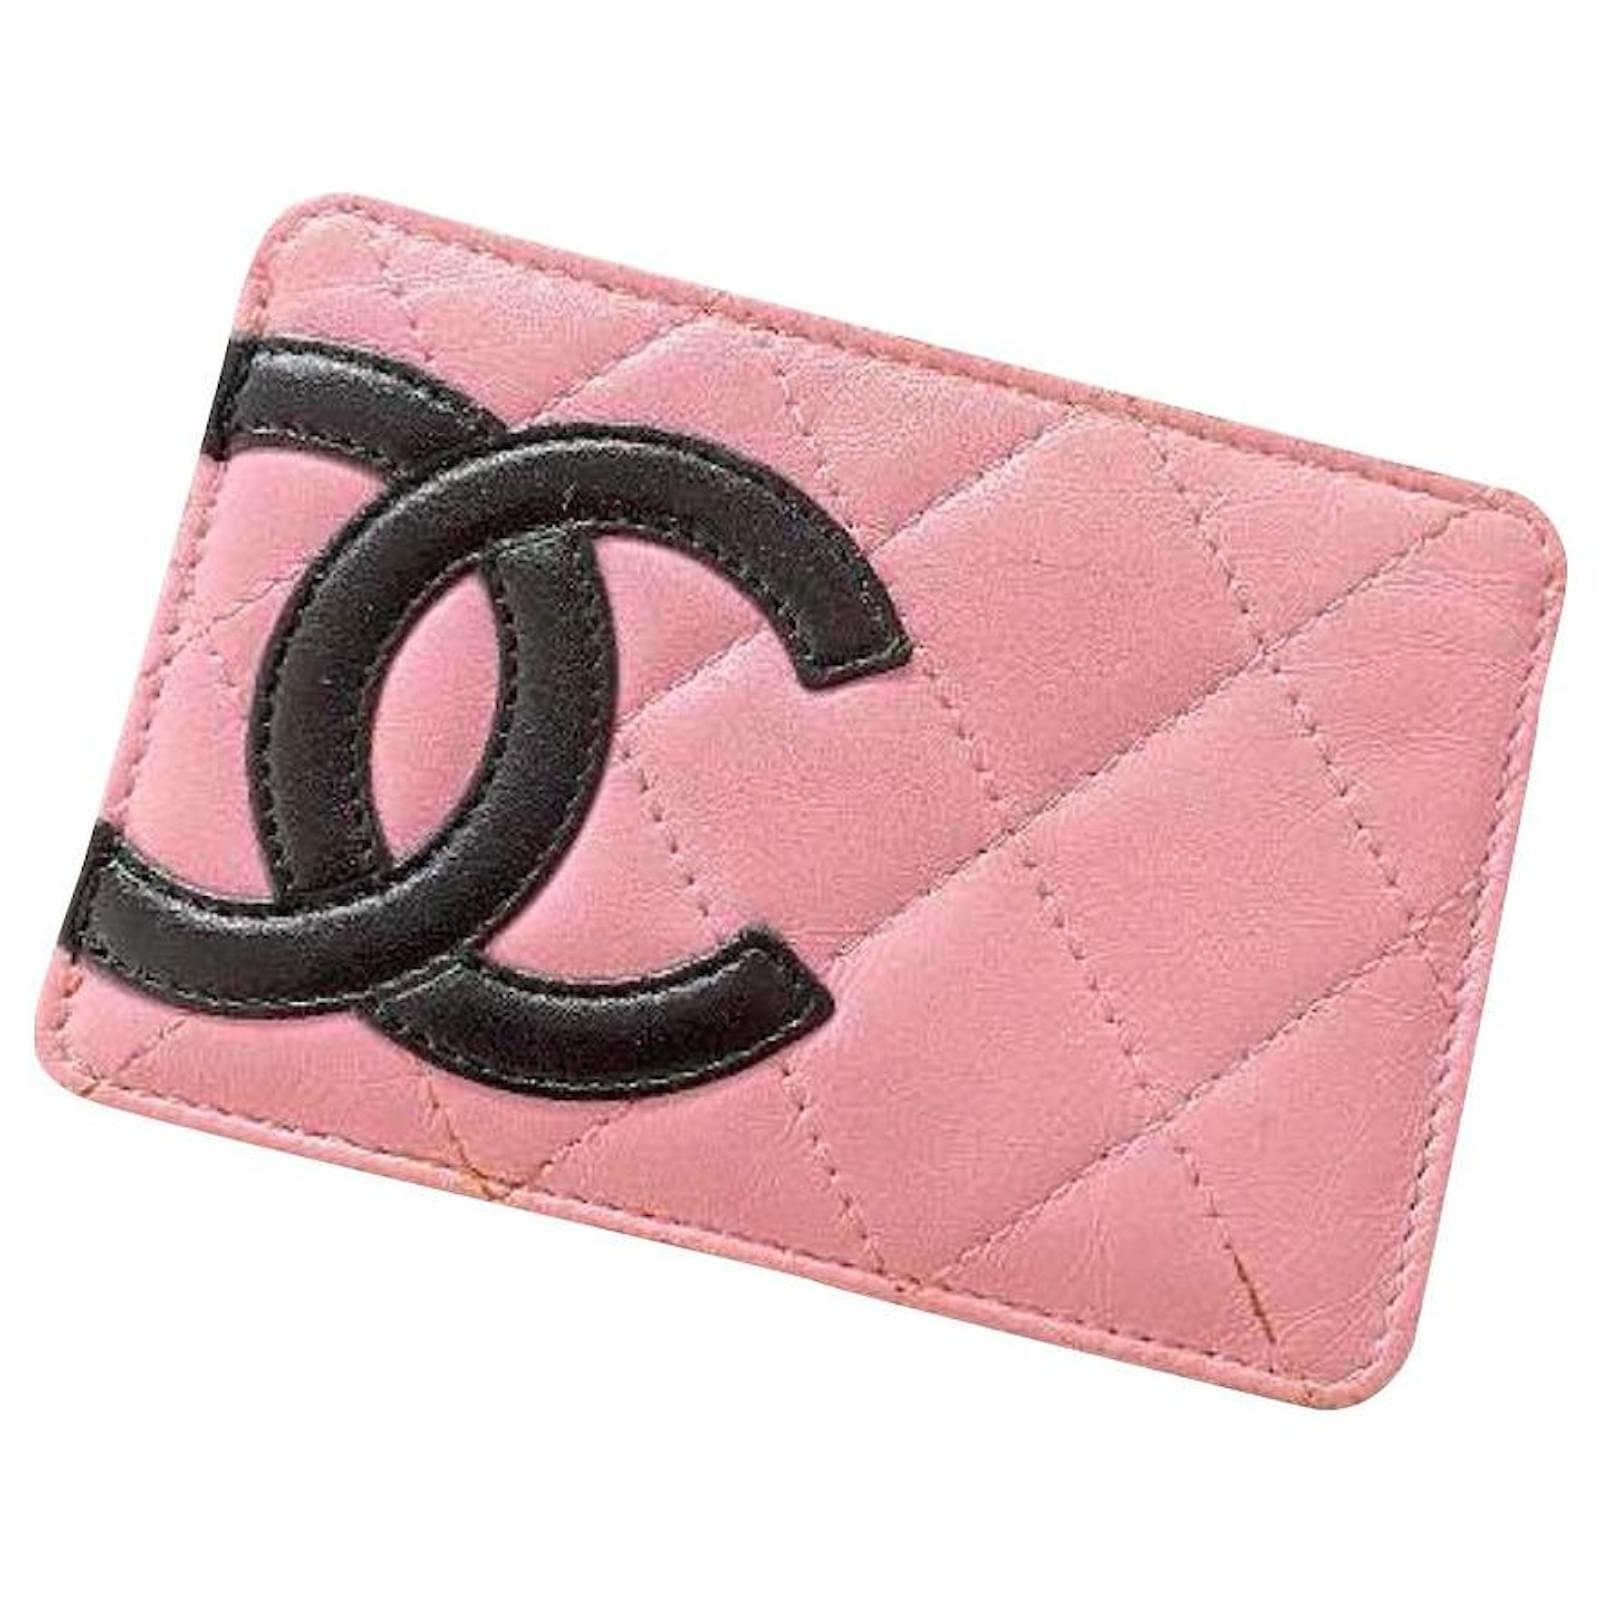 chanel pink wallet small black